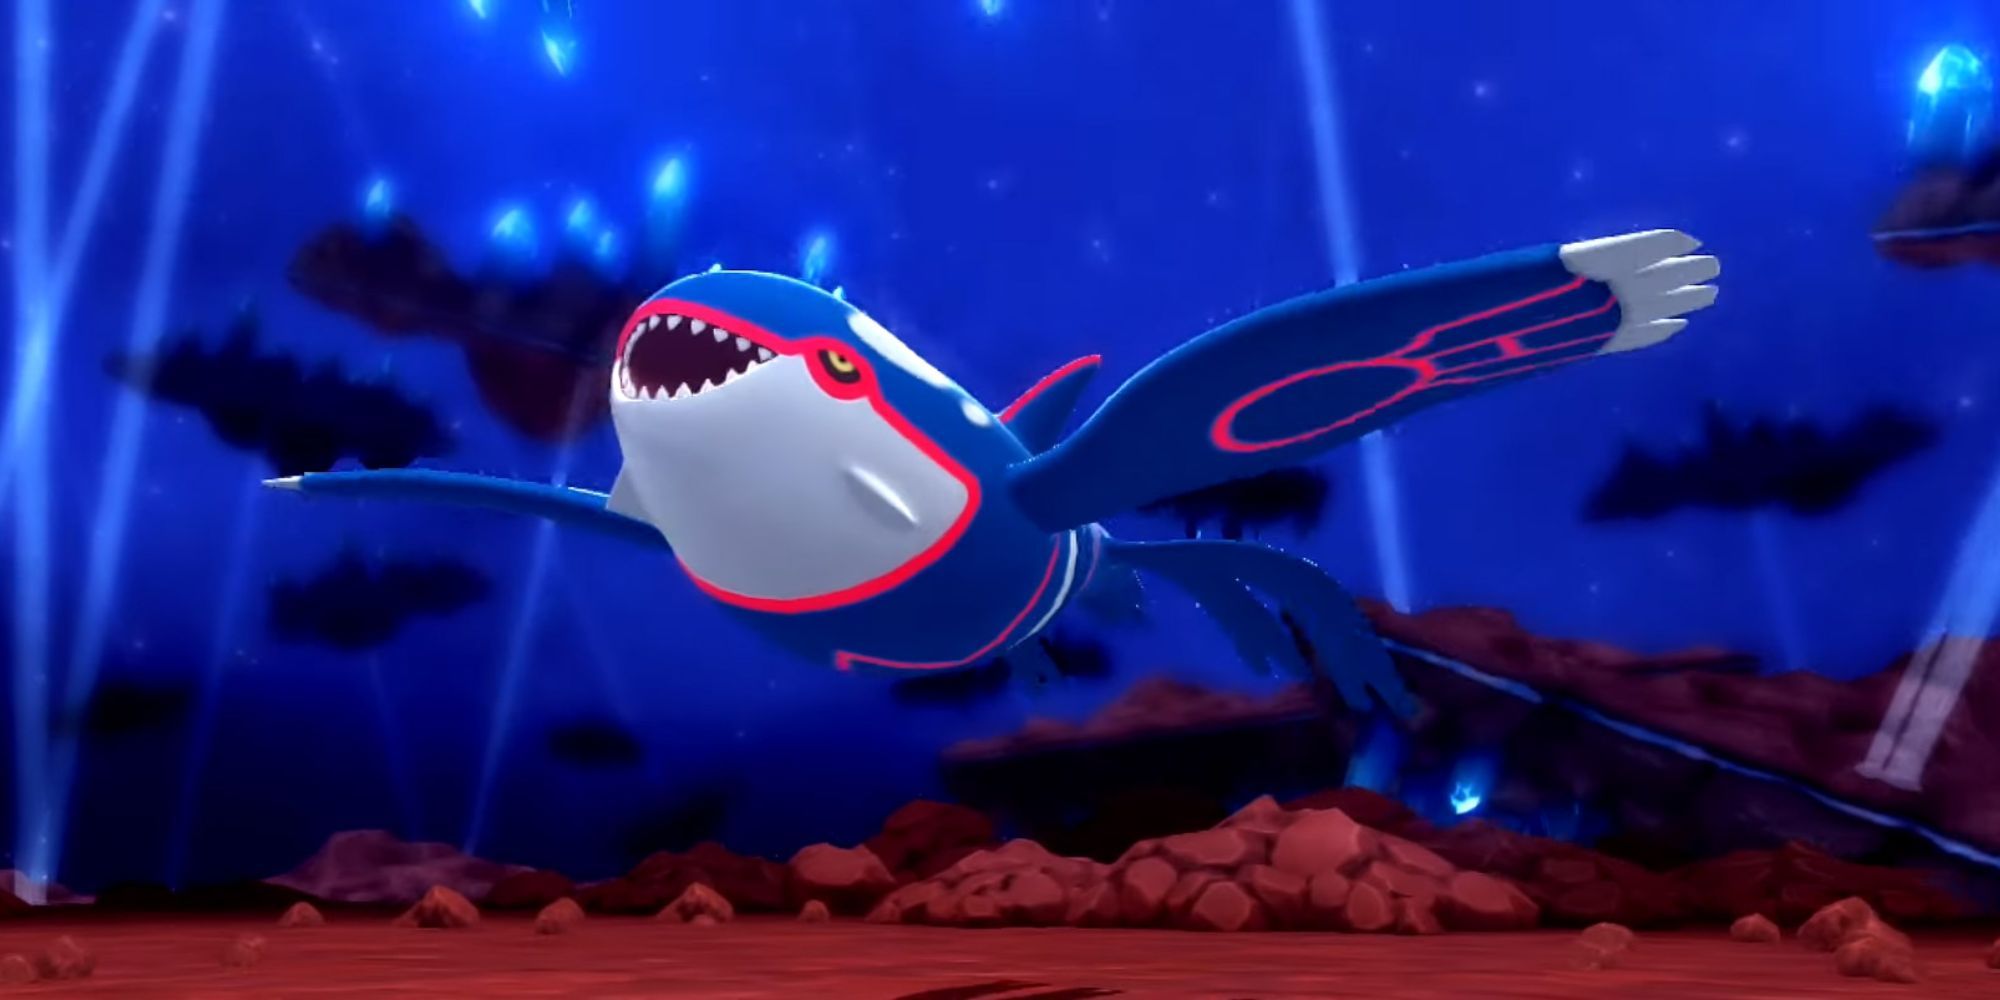 Kyogre is considered the King of the Pokemon Seas